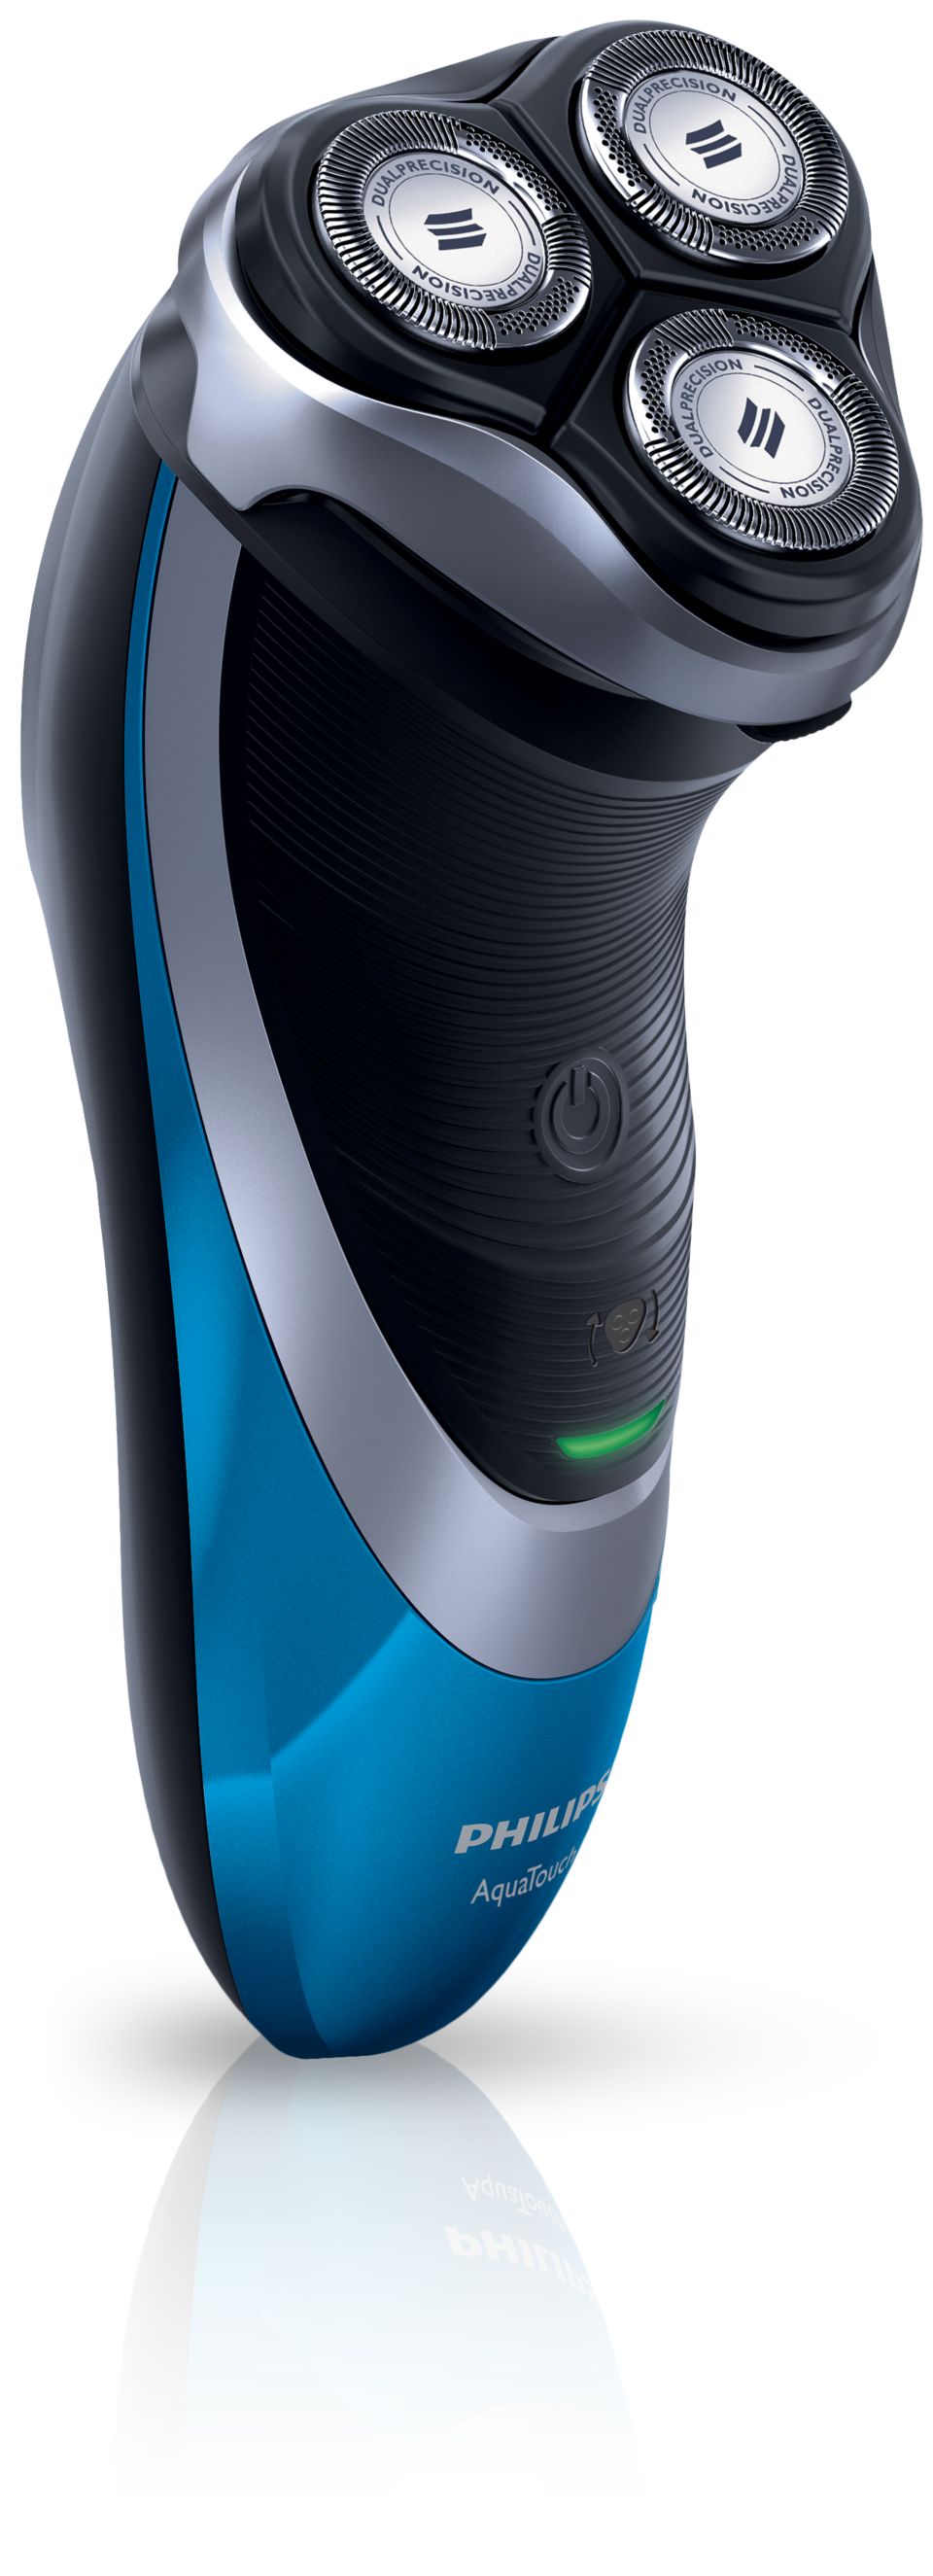 AquaTouch Wet and dry electric shaver AT890/20 | Philips